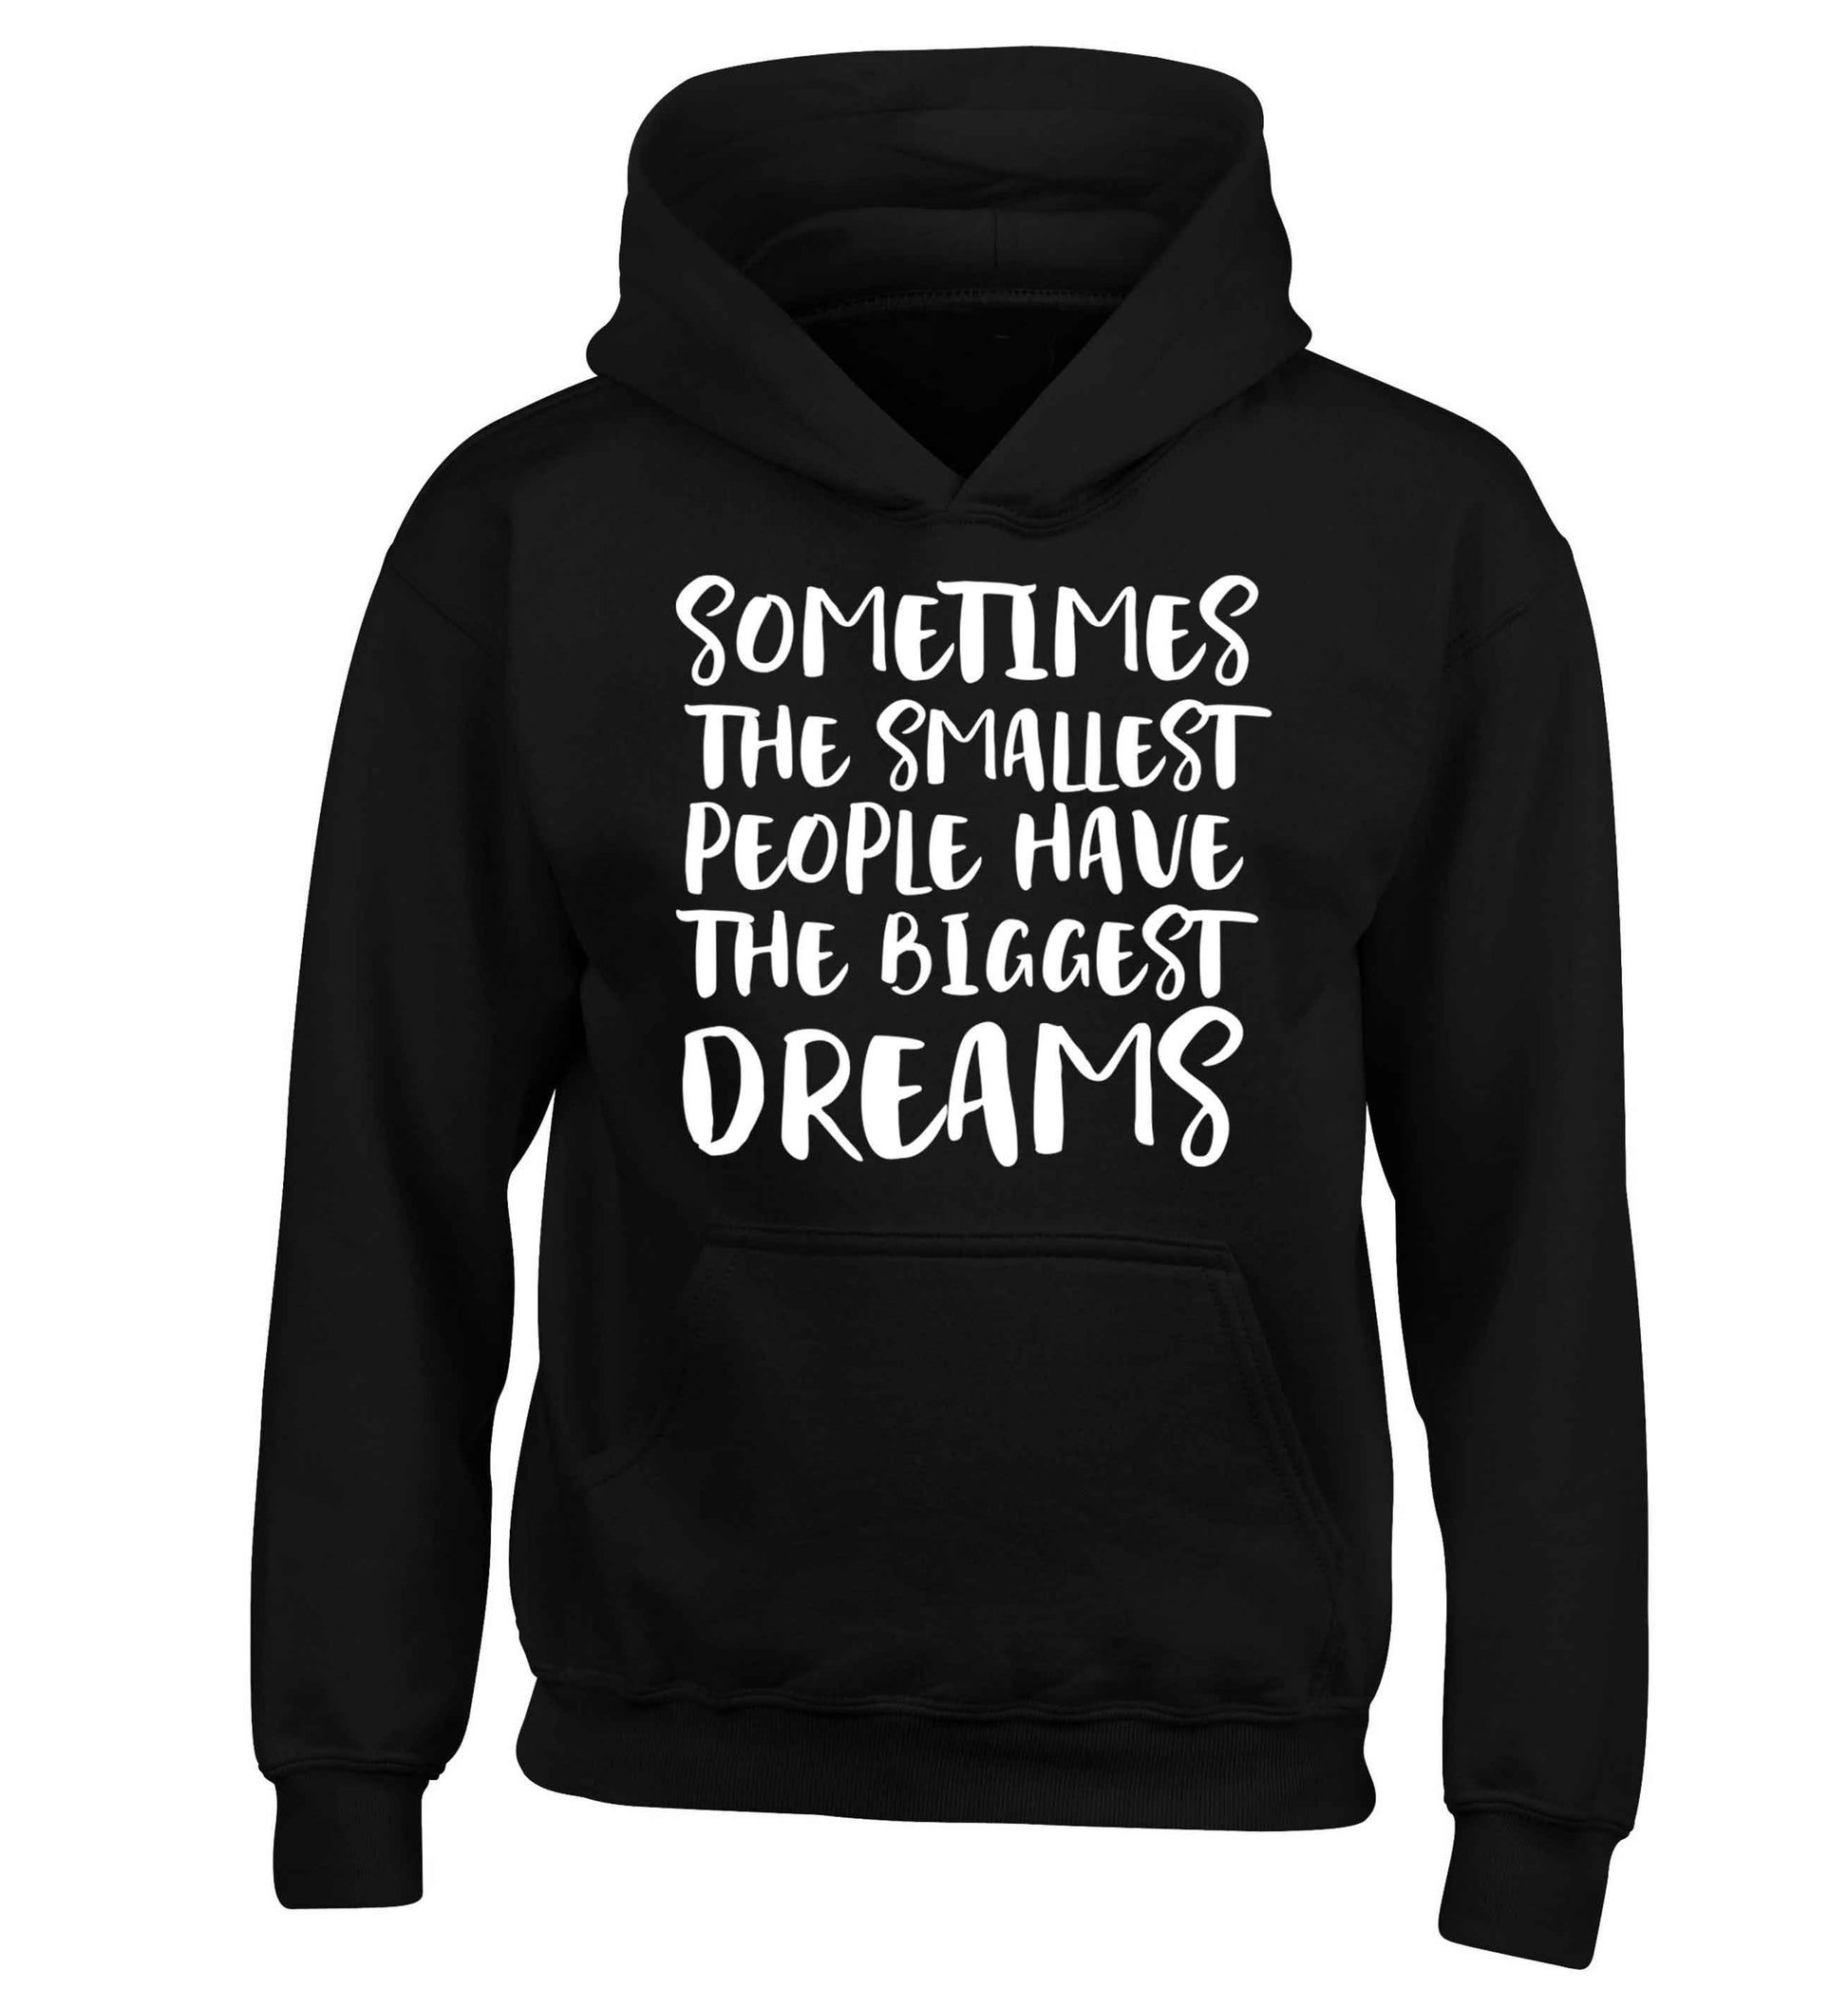 Sometimes the smallest people have the biggest dreams children's black hoodie 12-13 Years